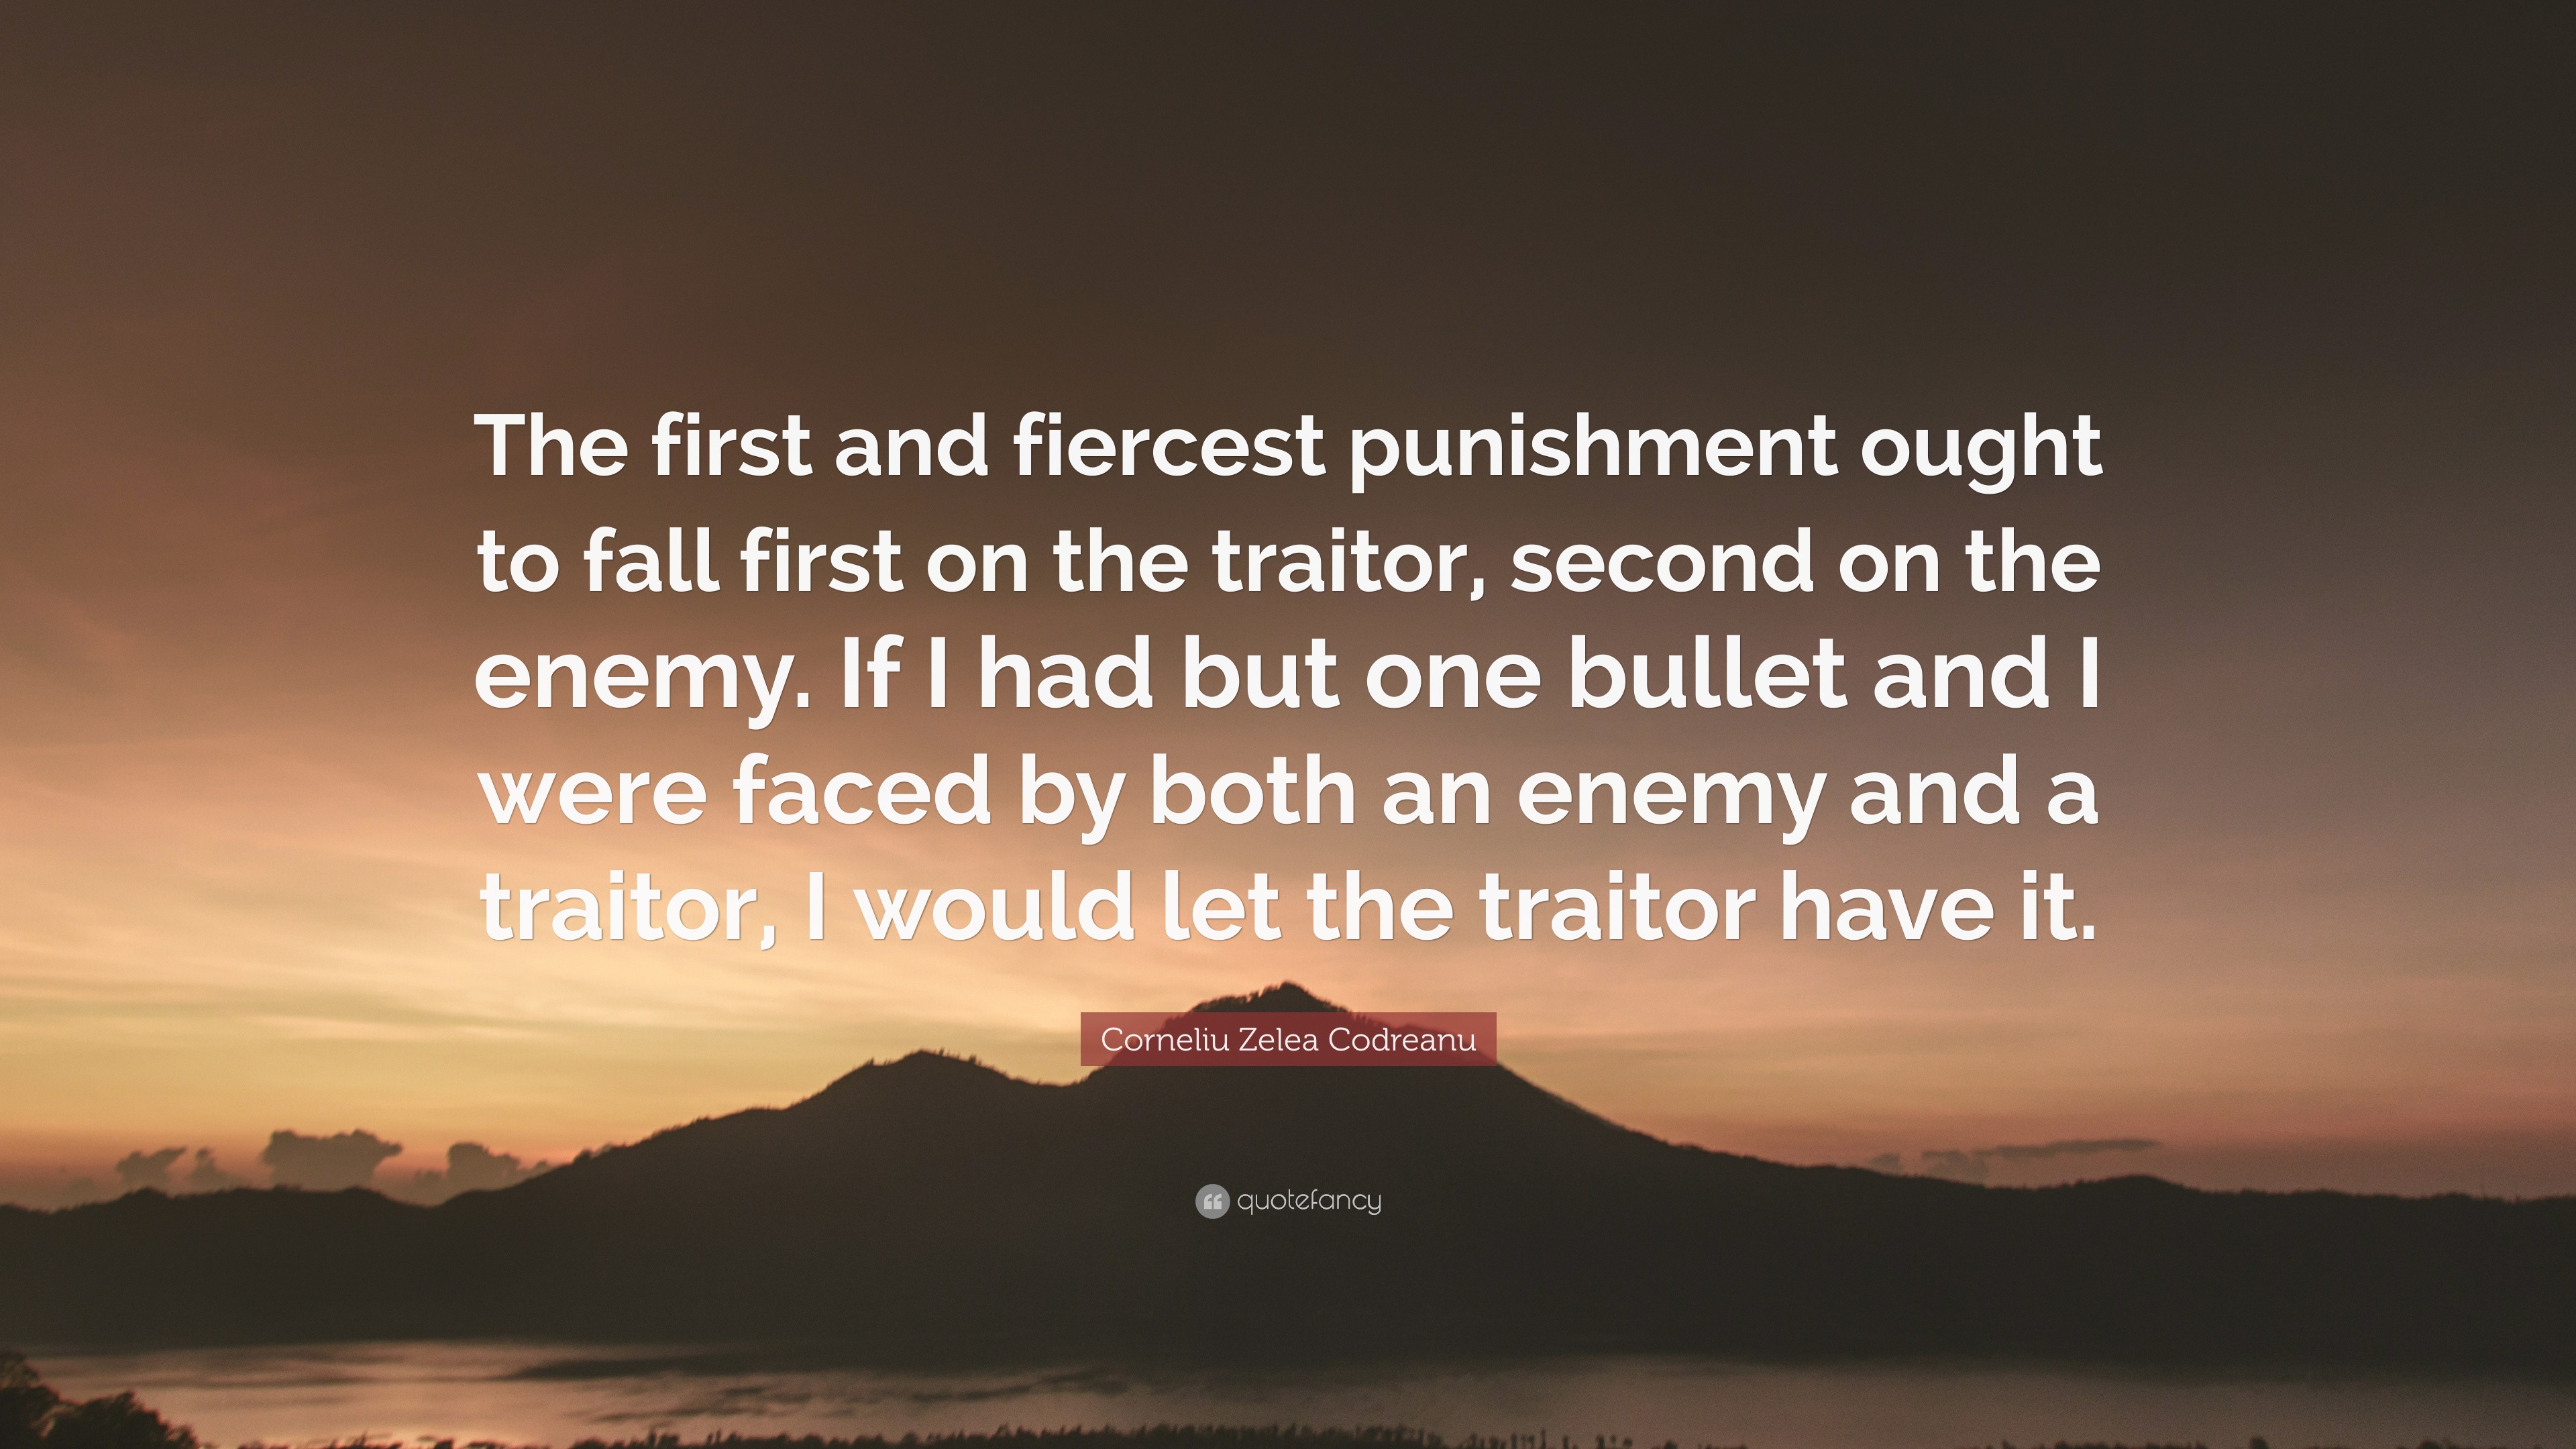 Traitor synonyms - 692 Words and Phrases for Traitor